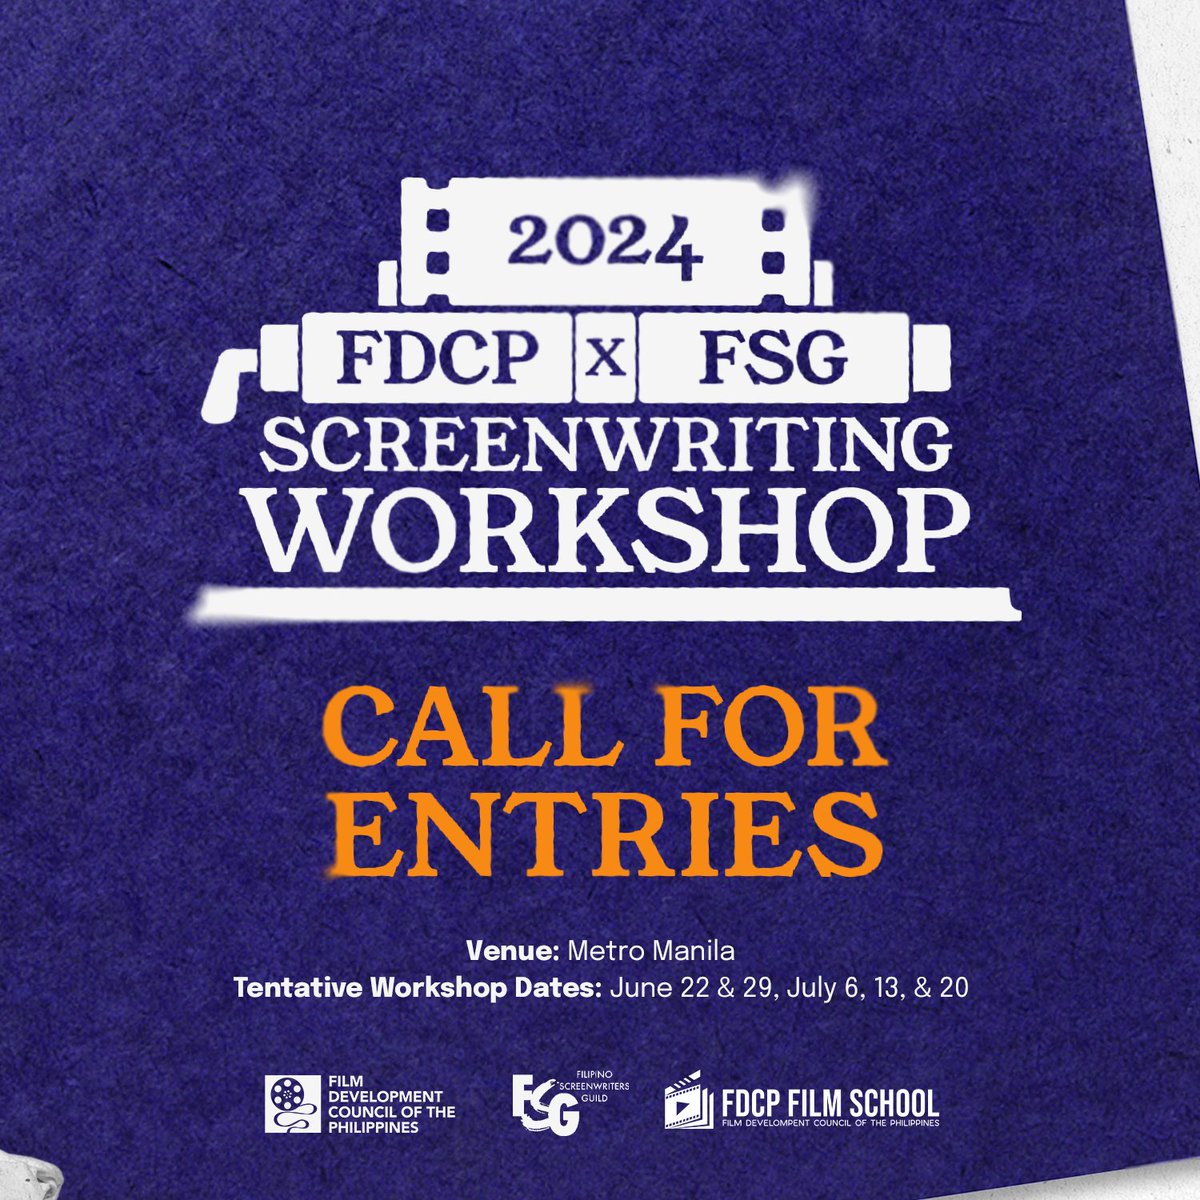 A FREE SCREENWRITING WORKSHOP FOR ASPIRING FILIPINO WRITERS!✒️📜 The Film Development Council of the Philippines (FDCP) is partnering with the Filipino Screenwriters Guild (FSG) to conduct a FREE screenwriting workshop series tailored for Filipino writers.